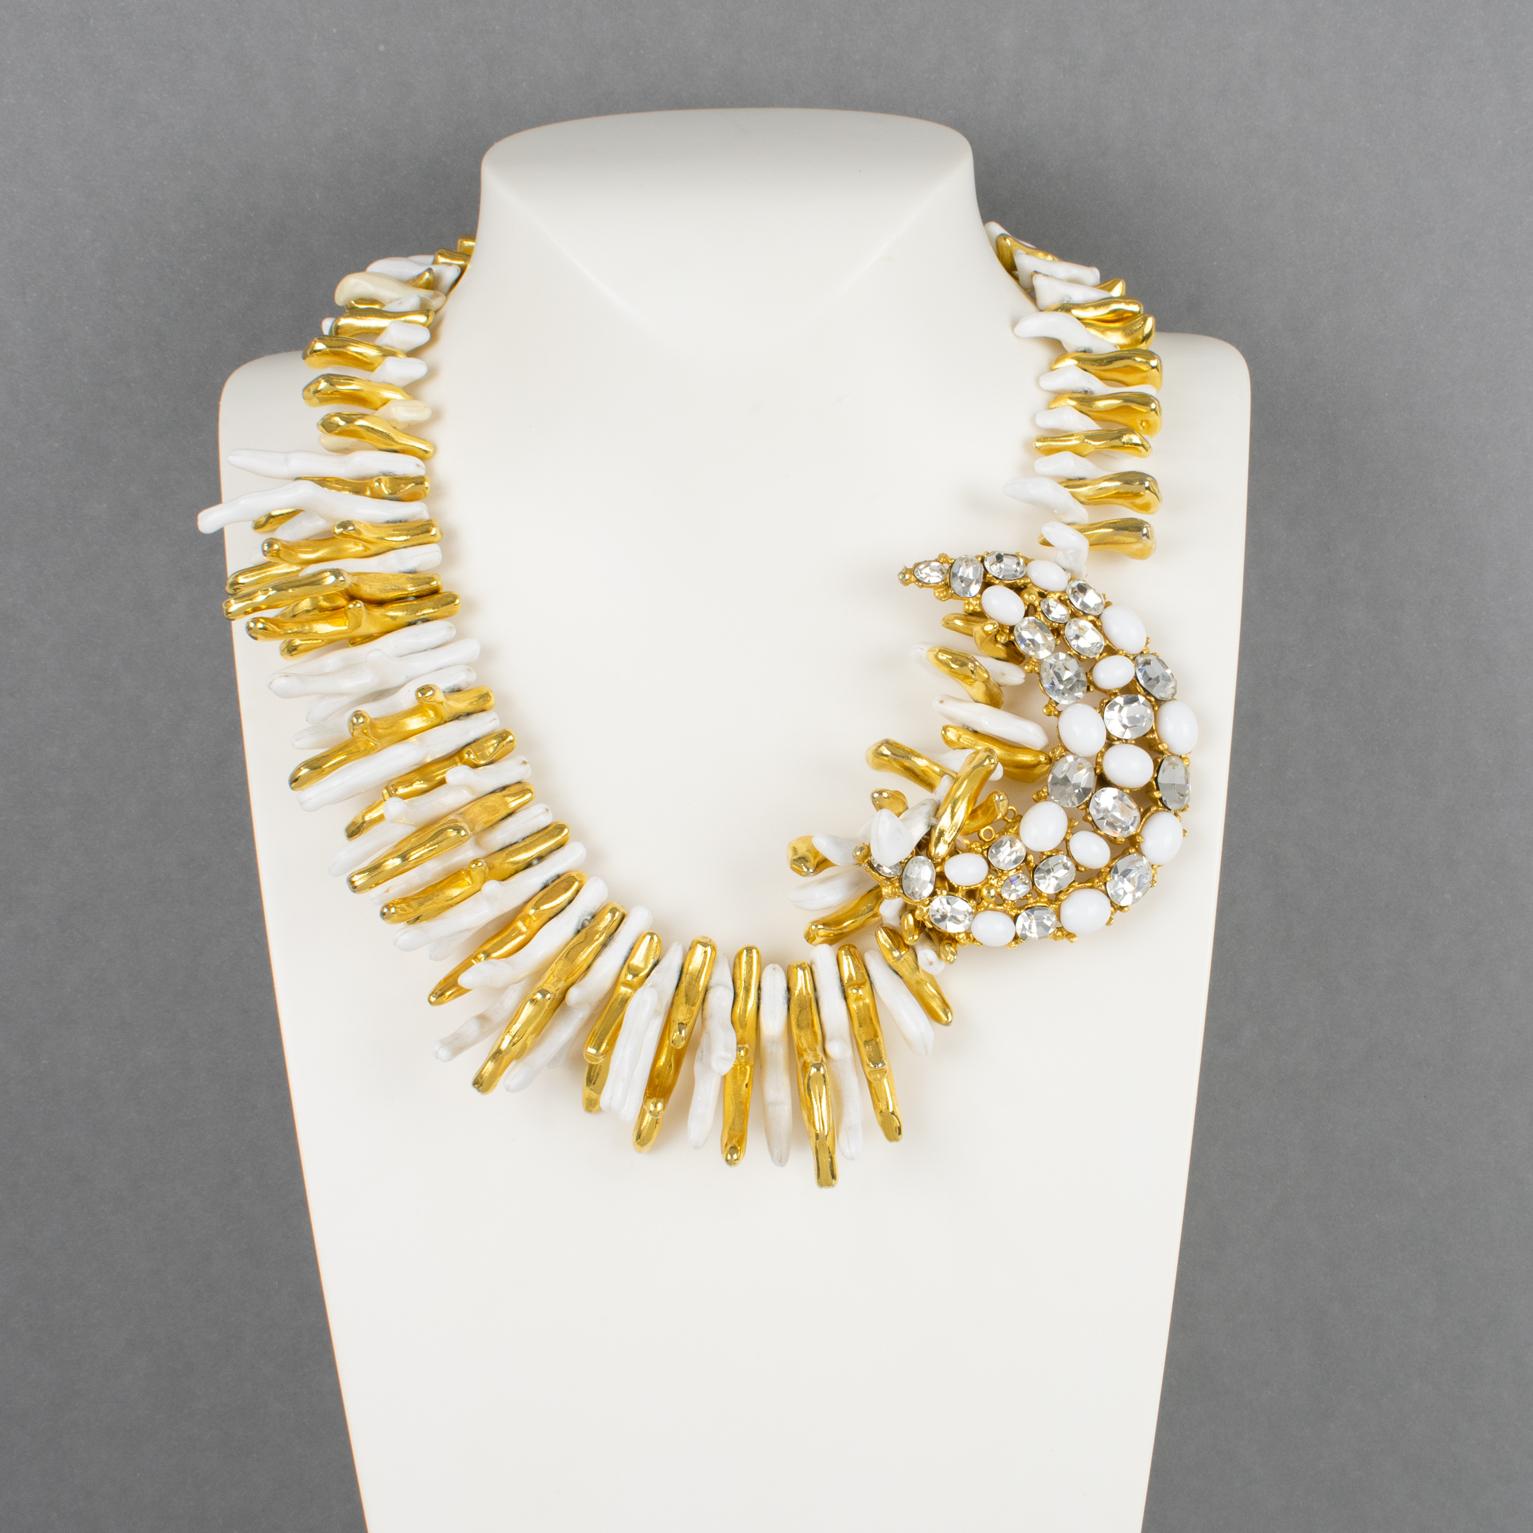 Modern Ugo Correani White and Gilded Faux-Coral Necklace with Jeweled Pendant For Sale